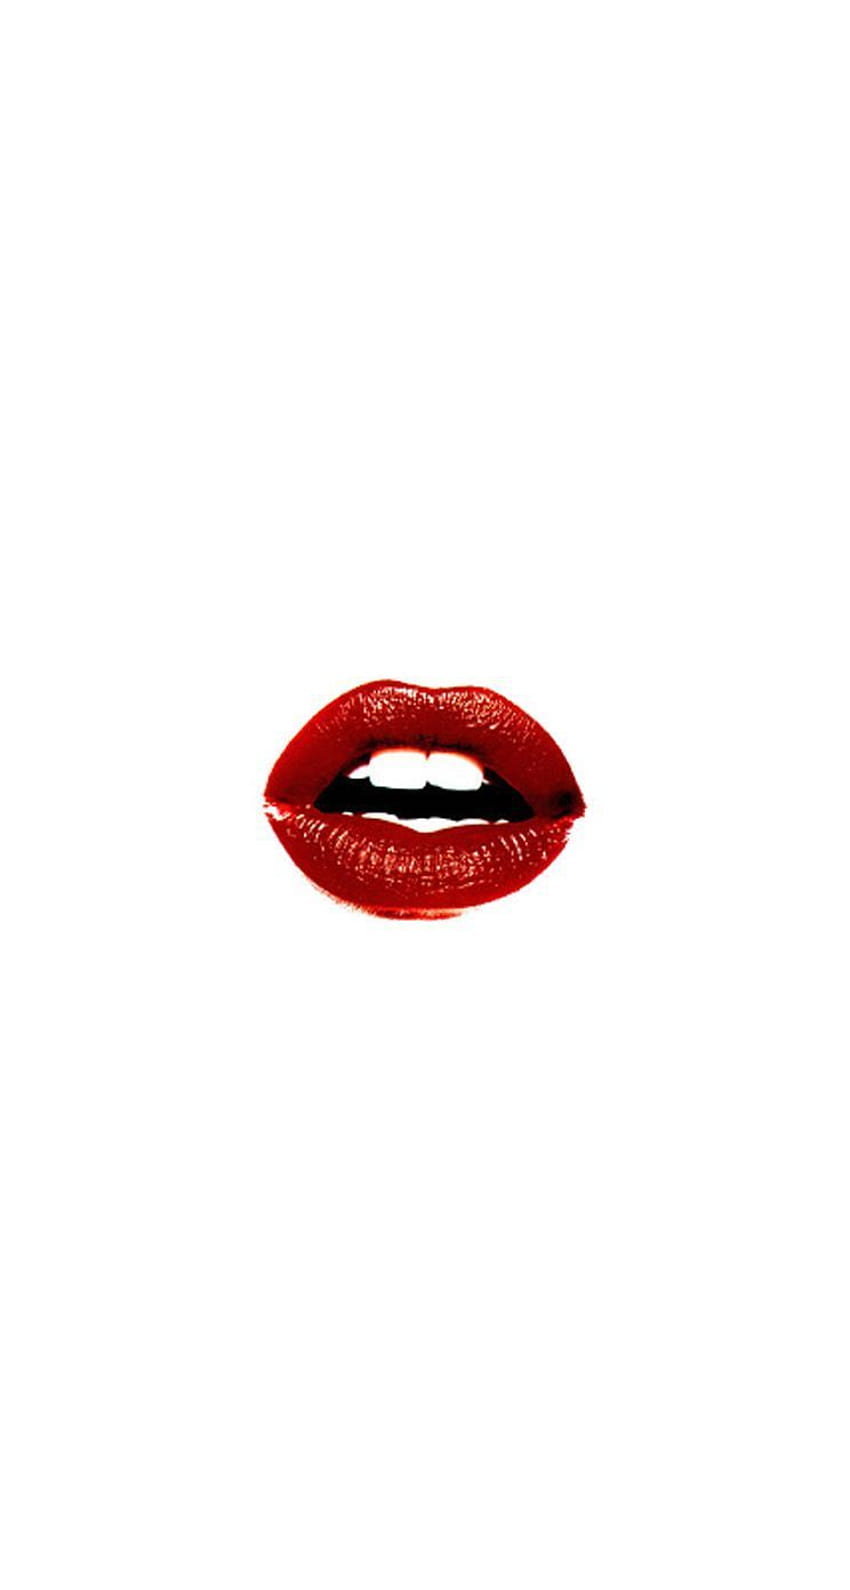 Red lips on a white background - Lips